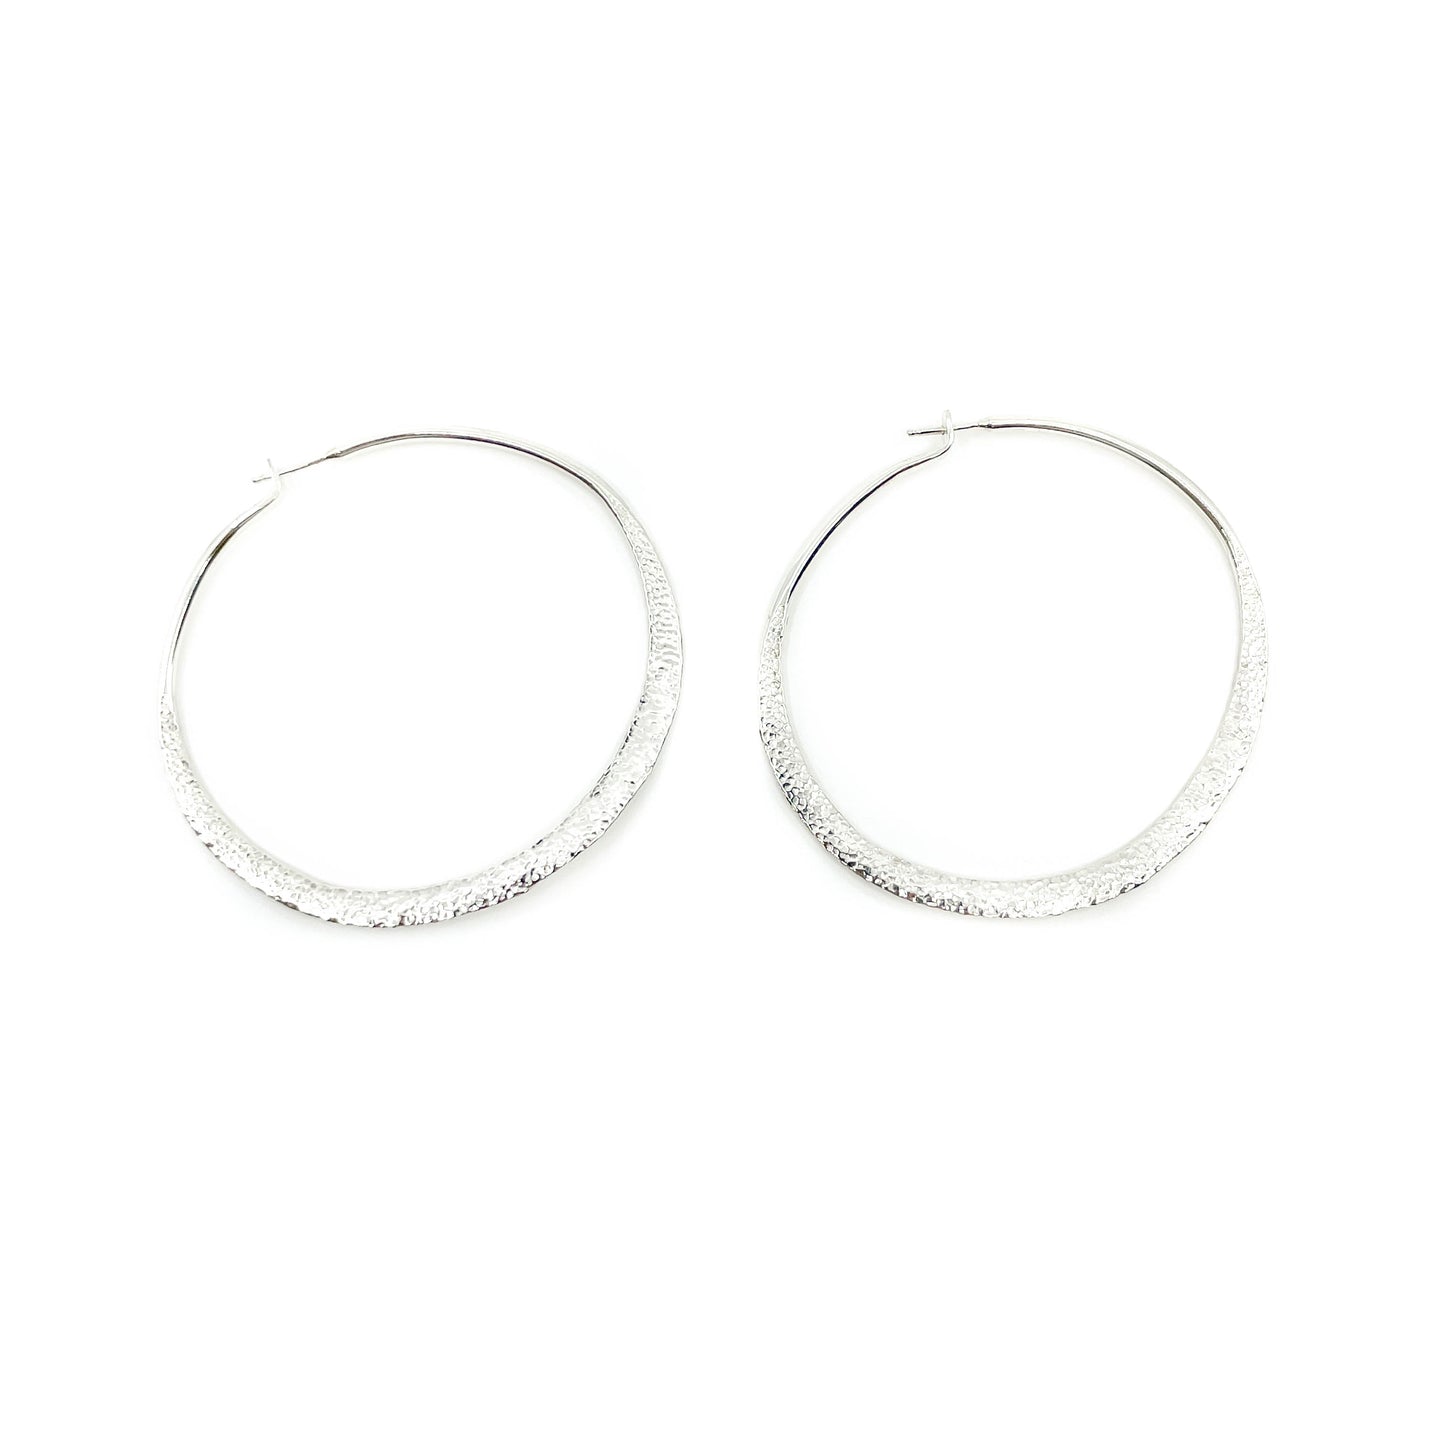 Load image into Gallery viewer, Sterling silver hand hammered and textured, wavy hoop earrings by Elgin Tom Sterling silver posts  Approximate dimensions: Hoops are 2.25 inches in diameter and just shy of 1/4 of an inch wide at widest flat area on bottom of hoop
